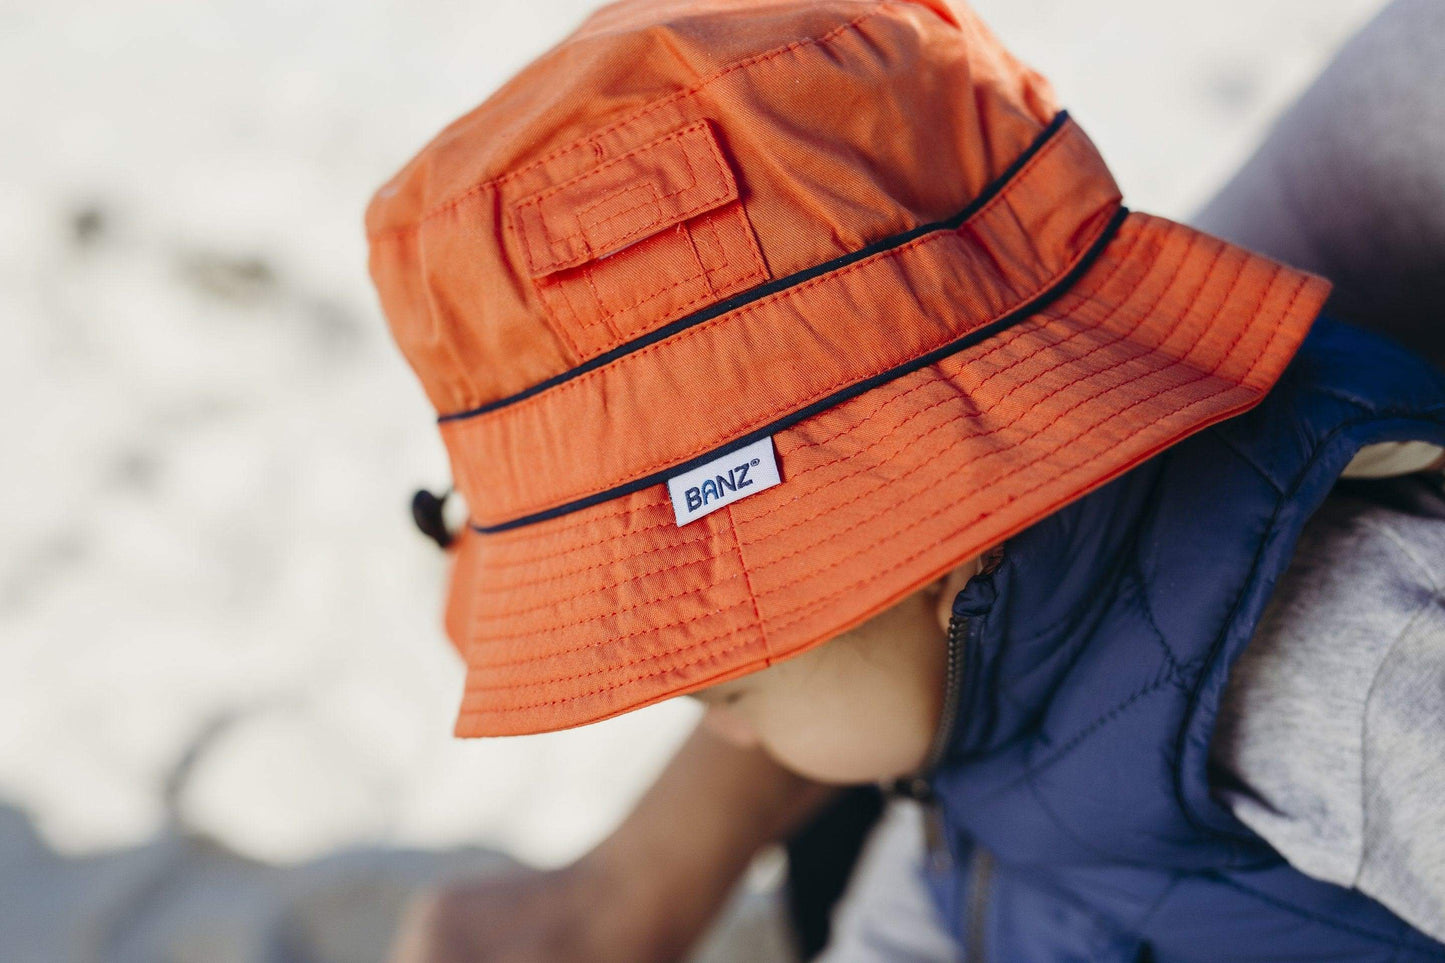 young child wears sun hat with pocket, pocket detail and banz tag can be seen close up